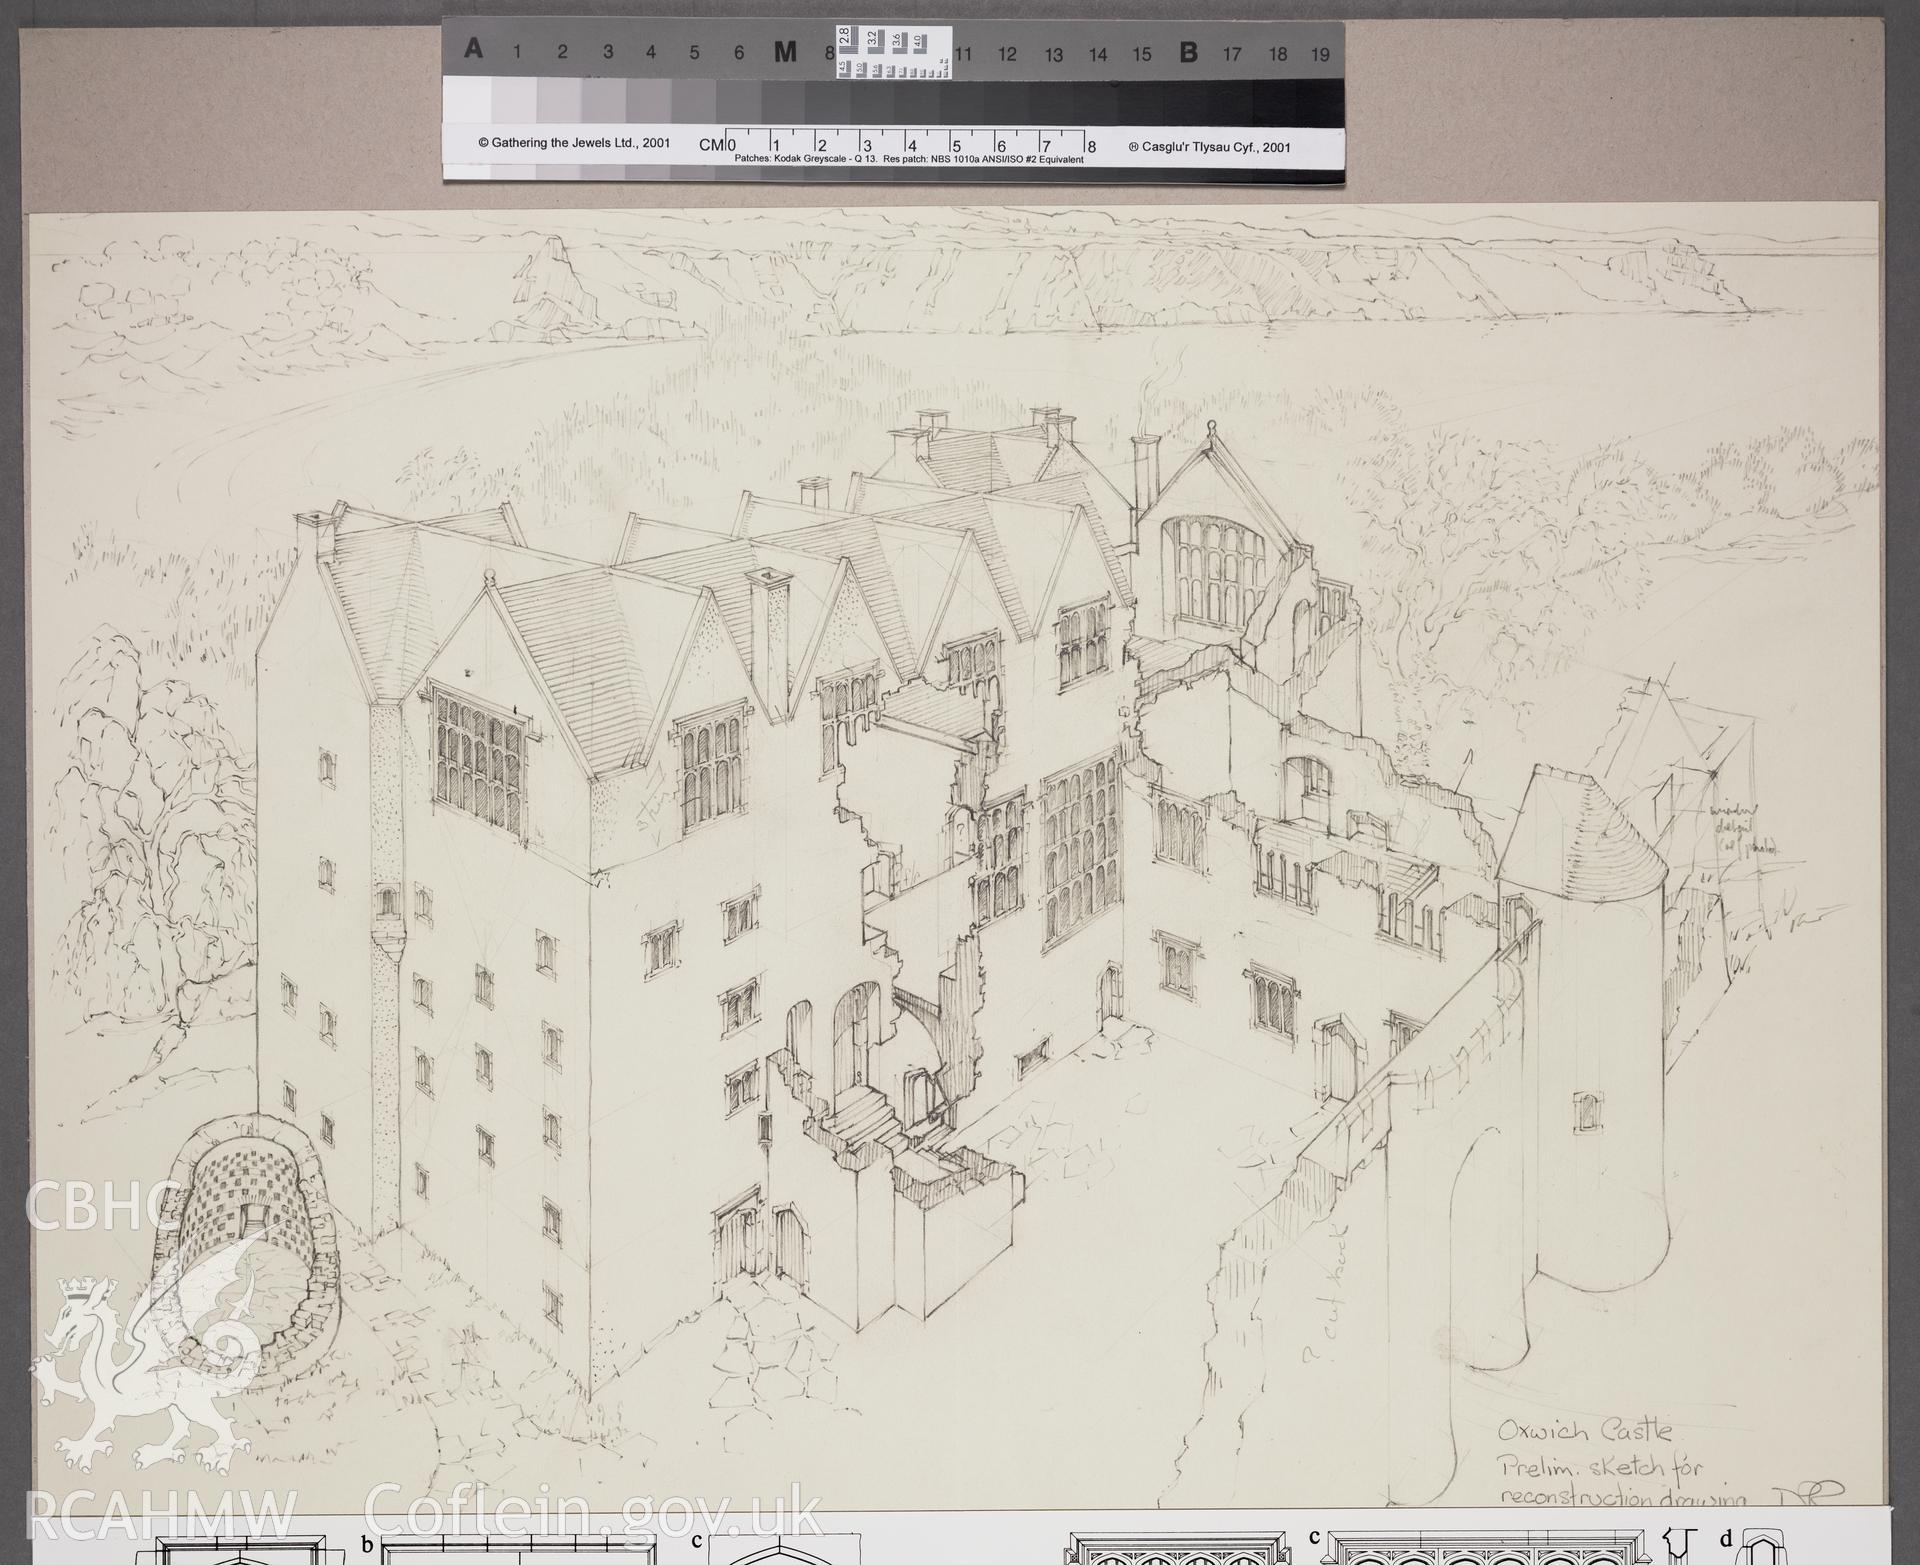 Digital copy of a preliminary sketch produced for reconstruction drawing of Oxwich Castle, Glamorgan, the finished drawing was published in Glamorgan The Greater Houses fig 7. This image forms part of drawing no 31(X9)